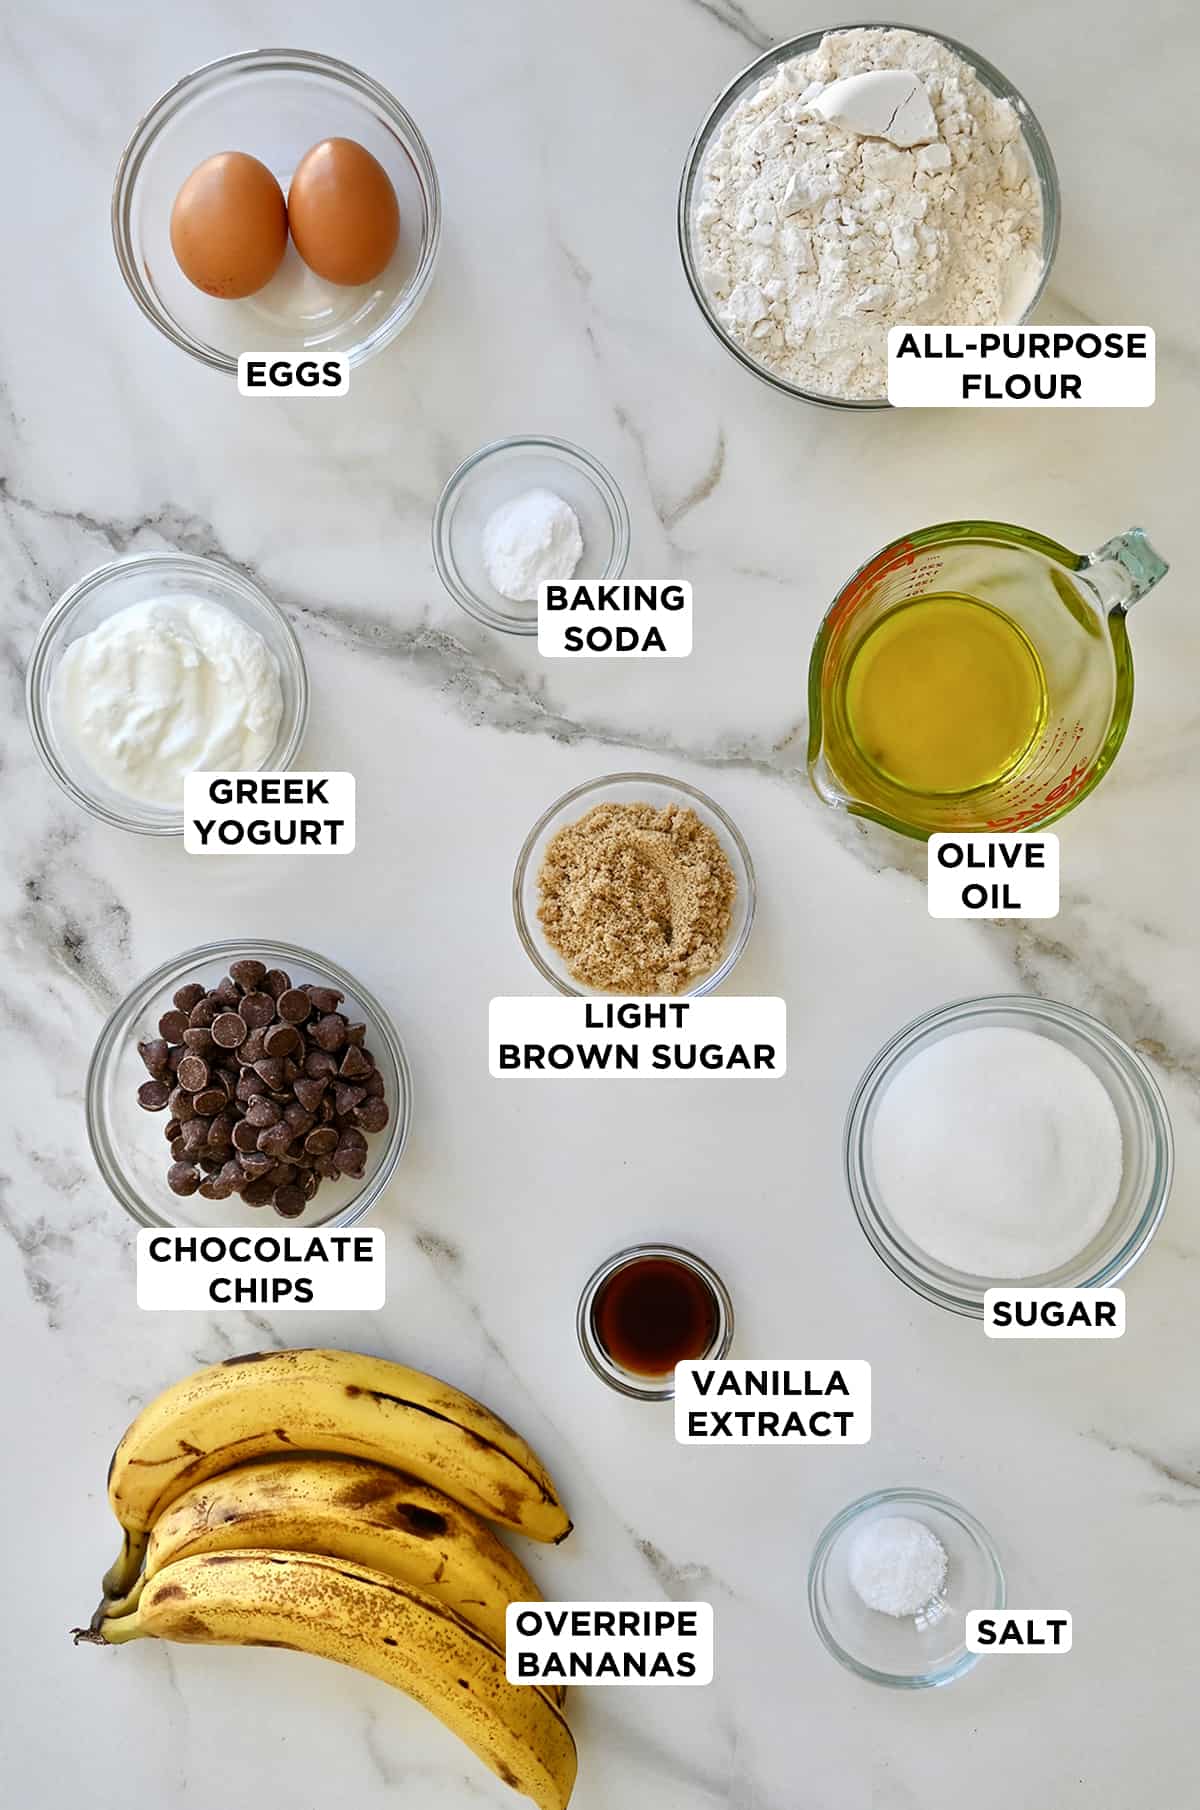 Overripe bananas next to various sizes of glass bowls and a liquid measuring cup containing the ingredients needed to make banana bread muffins, including flour, olive oil, sugar, vanilla extract, salt, chocolate chips, brown sugar, Greek yogurt, baking soda and eggs.